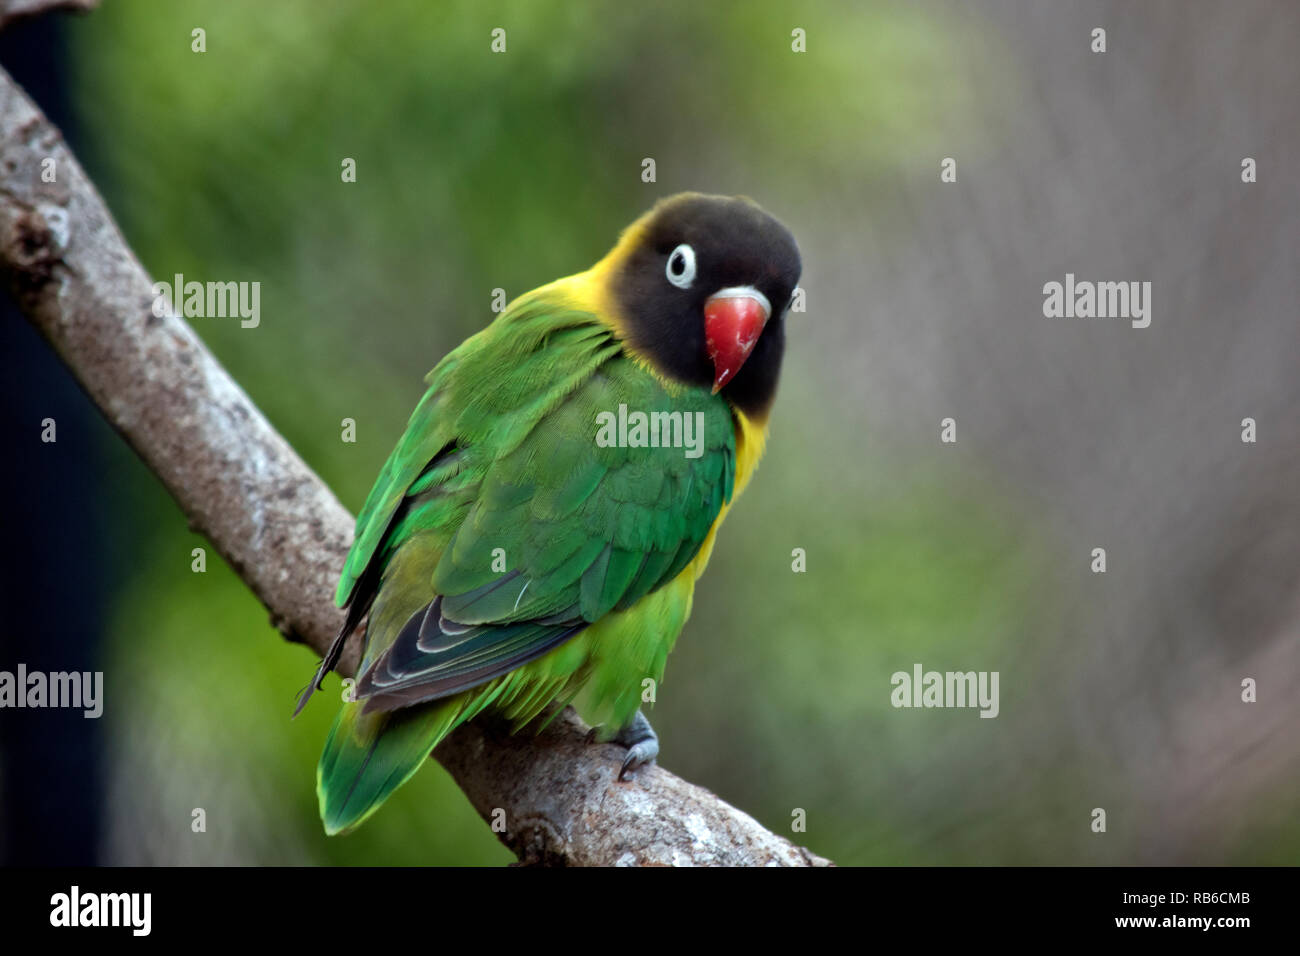 the masked lovebird is perched in a tree Stock Photo